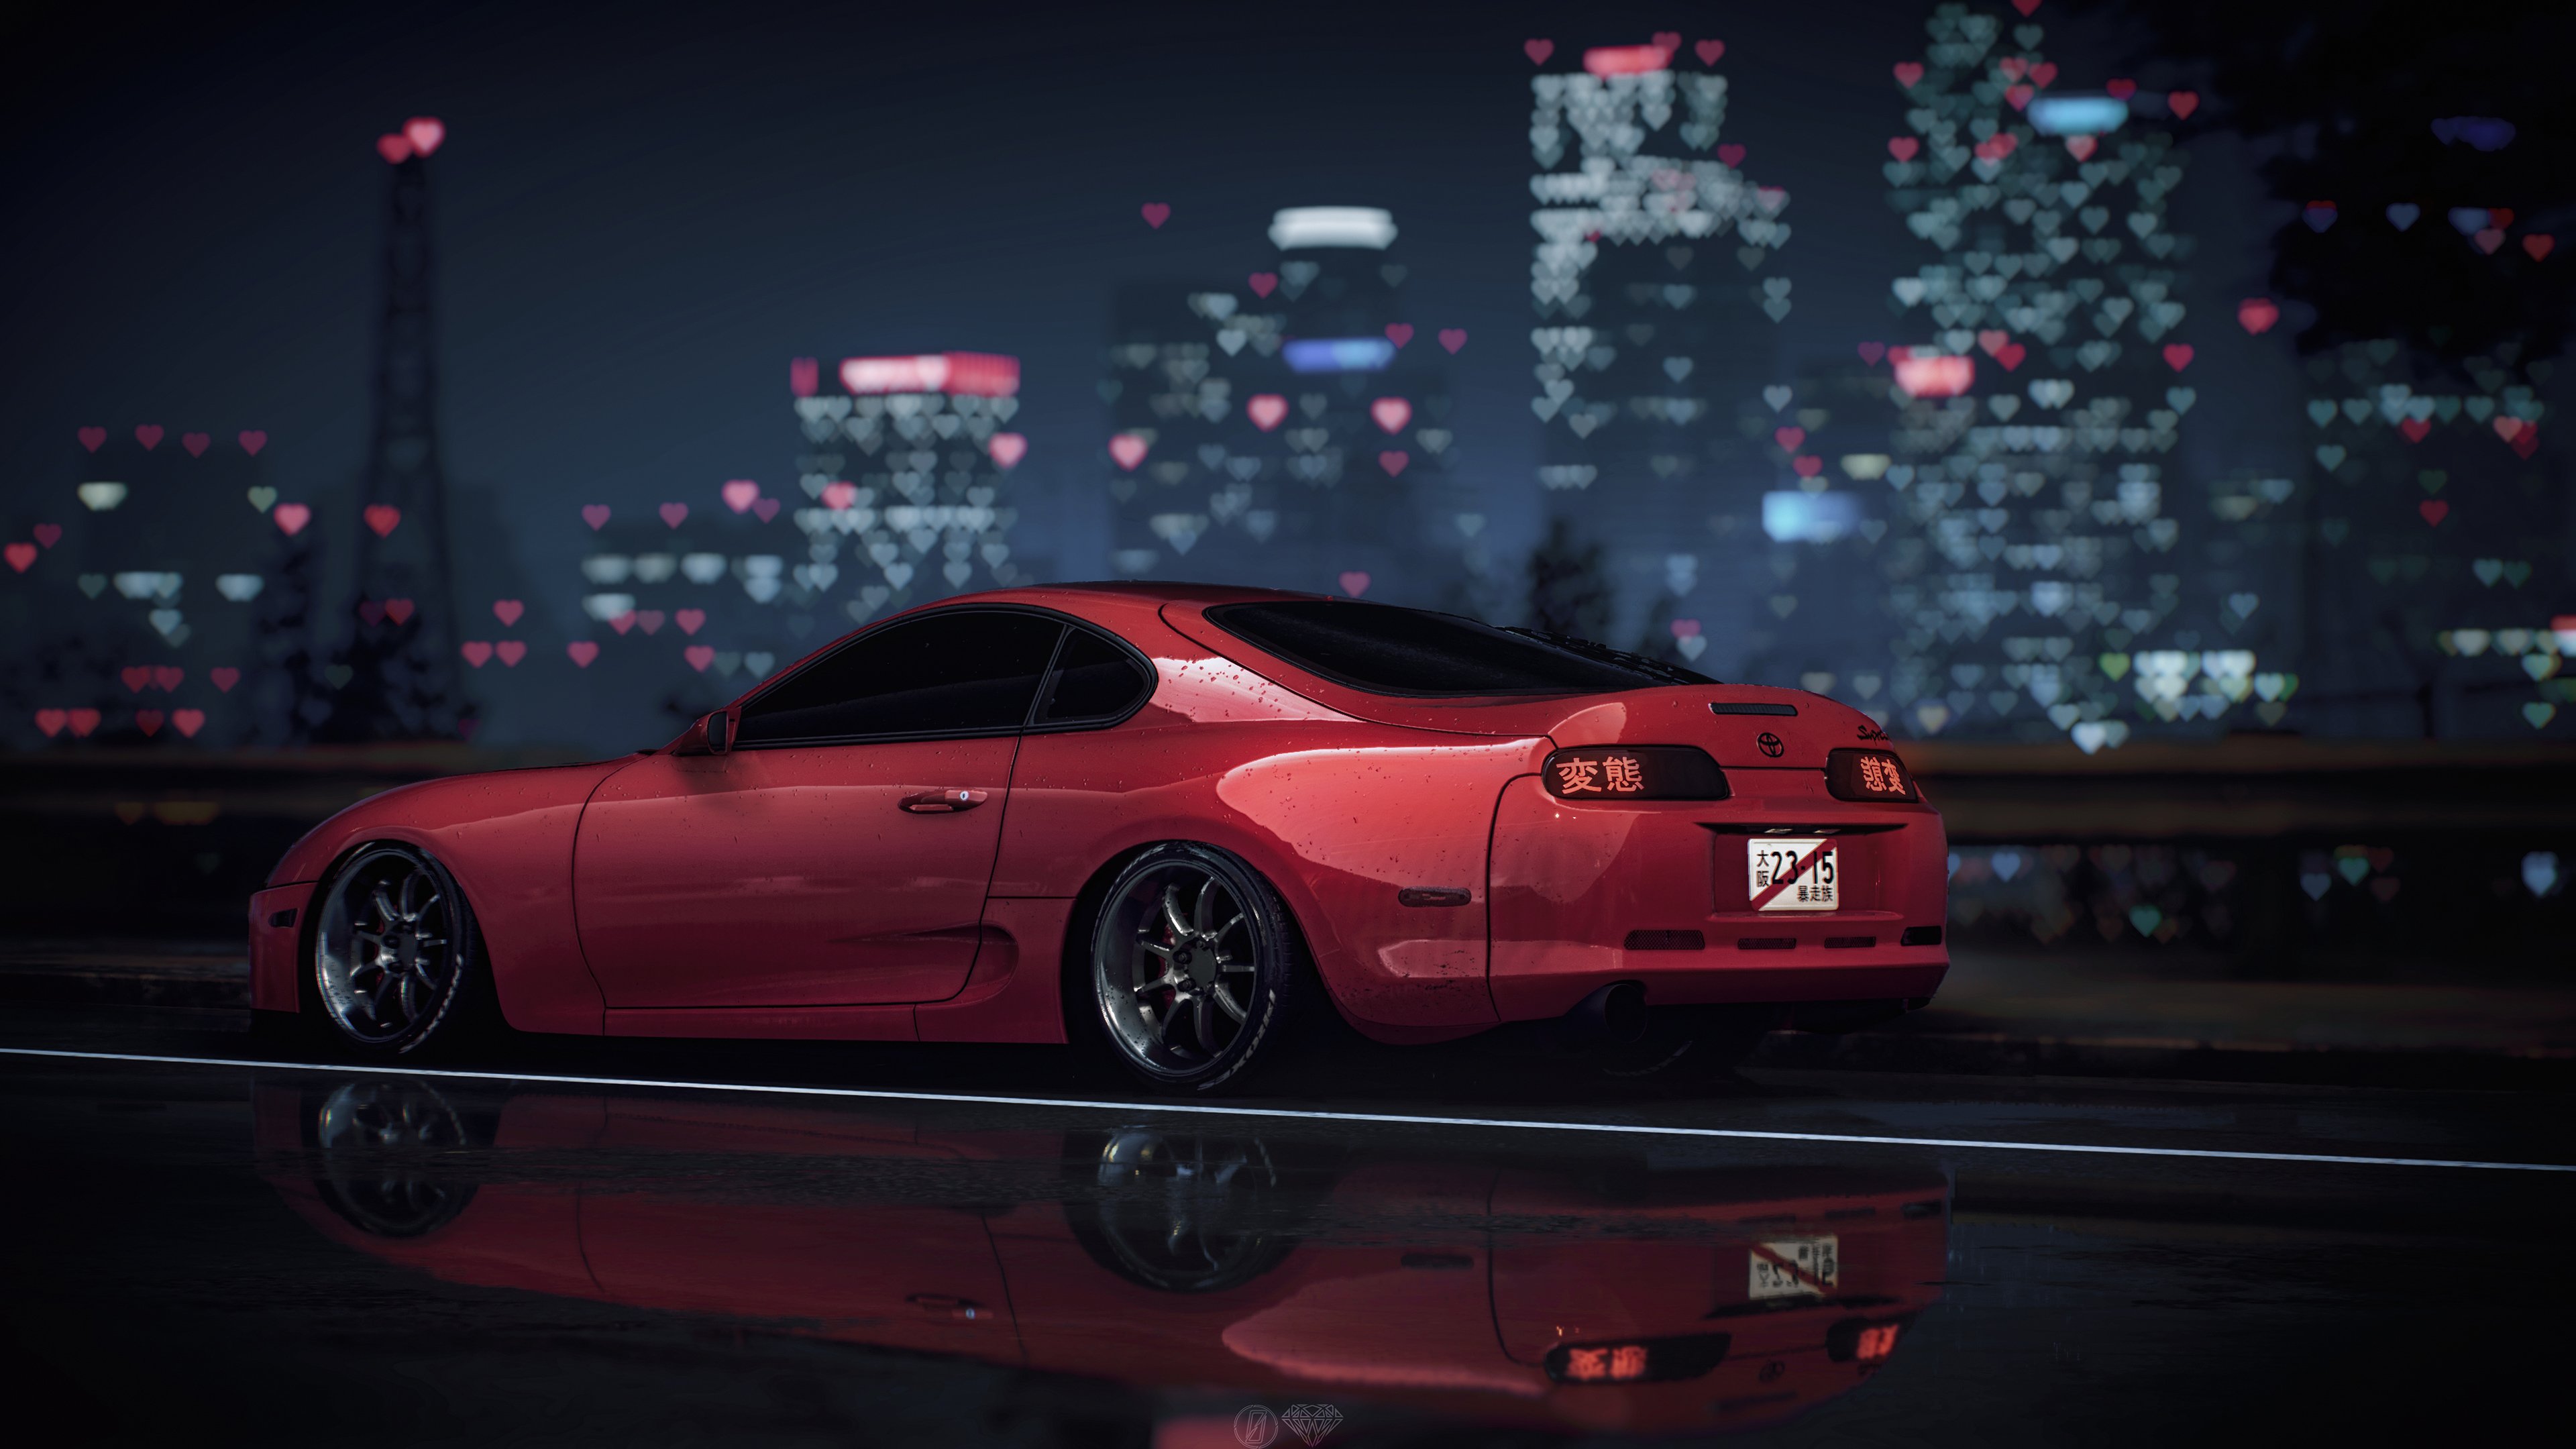 5837176 toyota supra need for speed games hd 4k cars   Cool 3840x2160